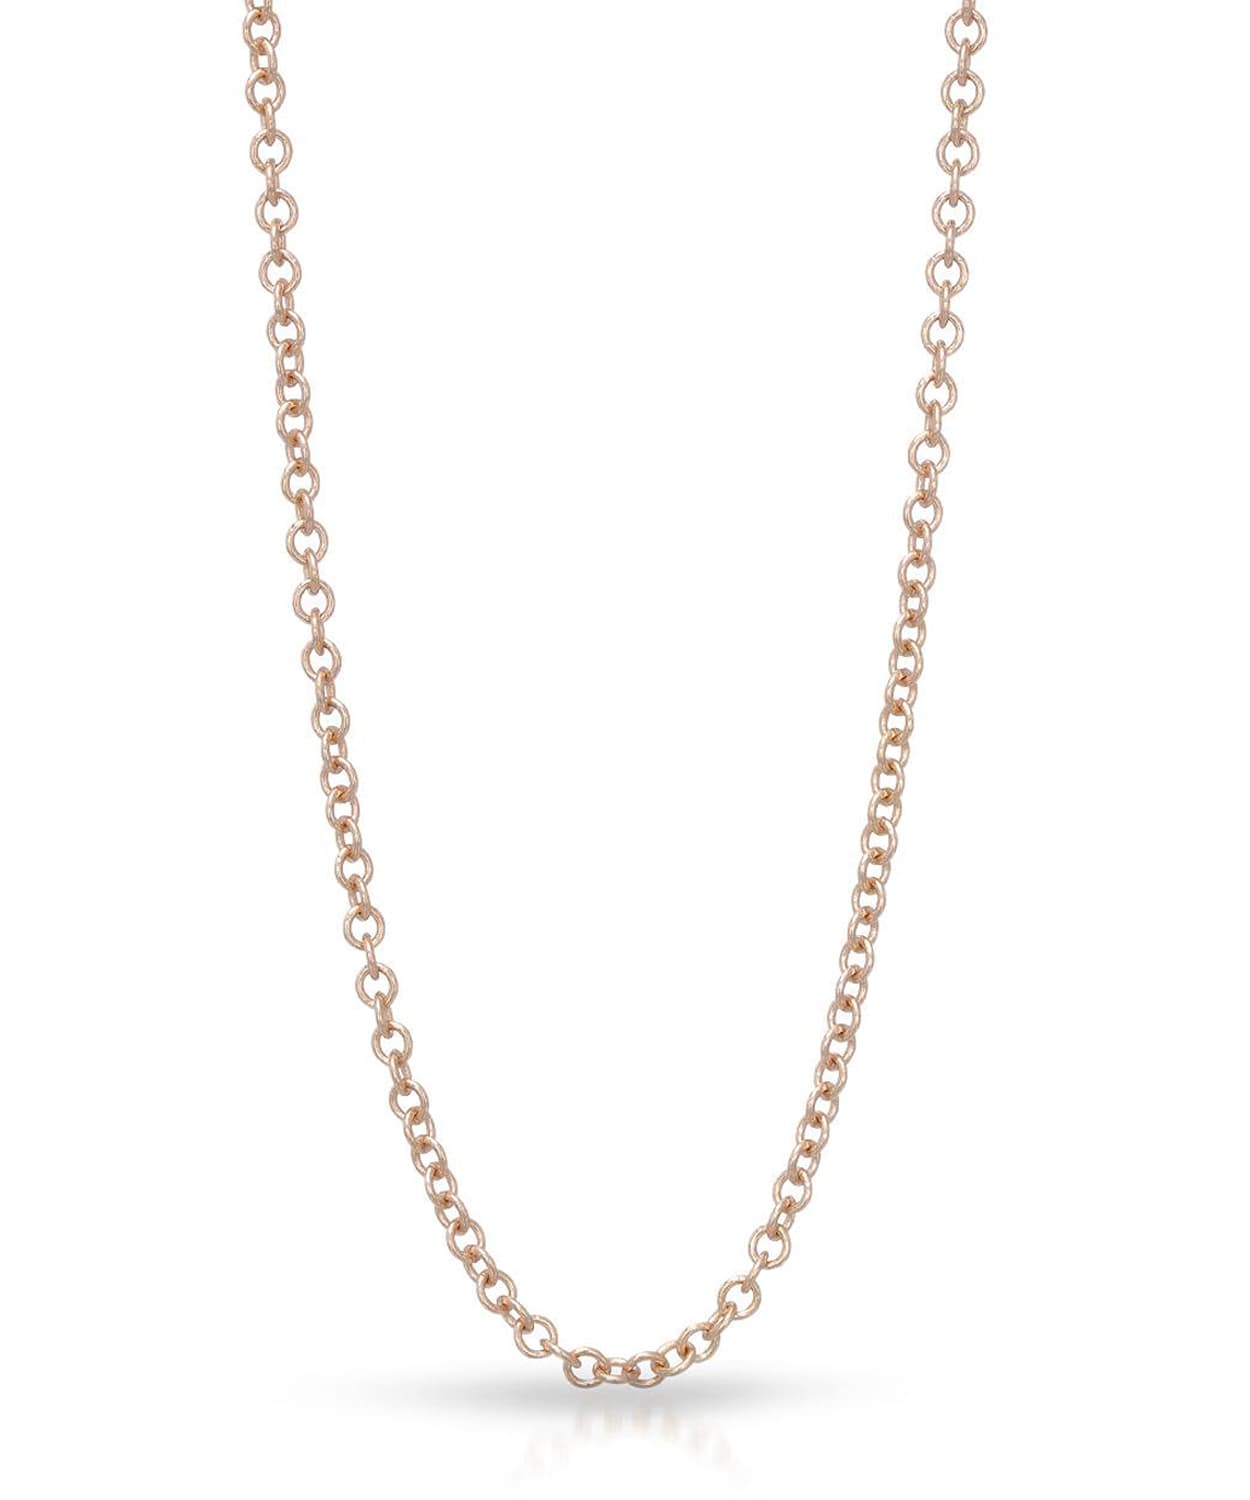 ESEMCO 2.1mm 14K Rose Gold Rolo Chain View 1